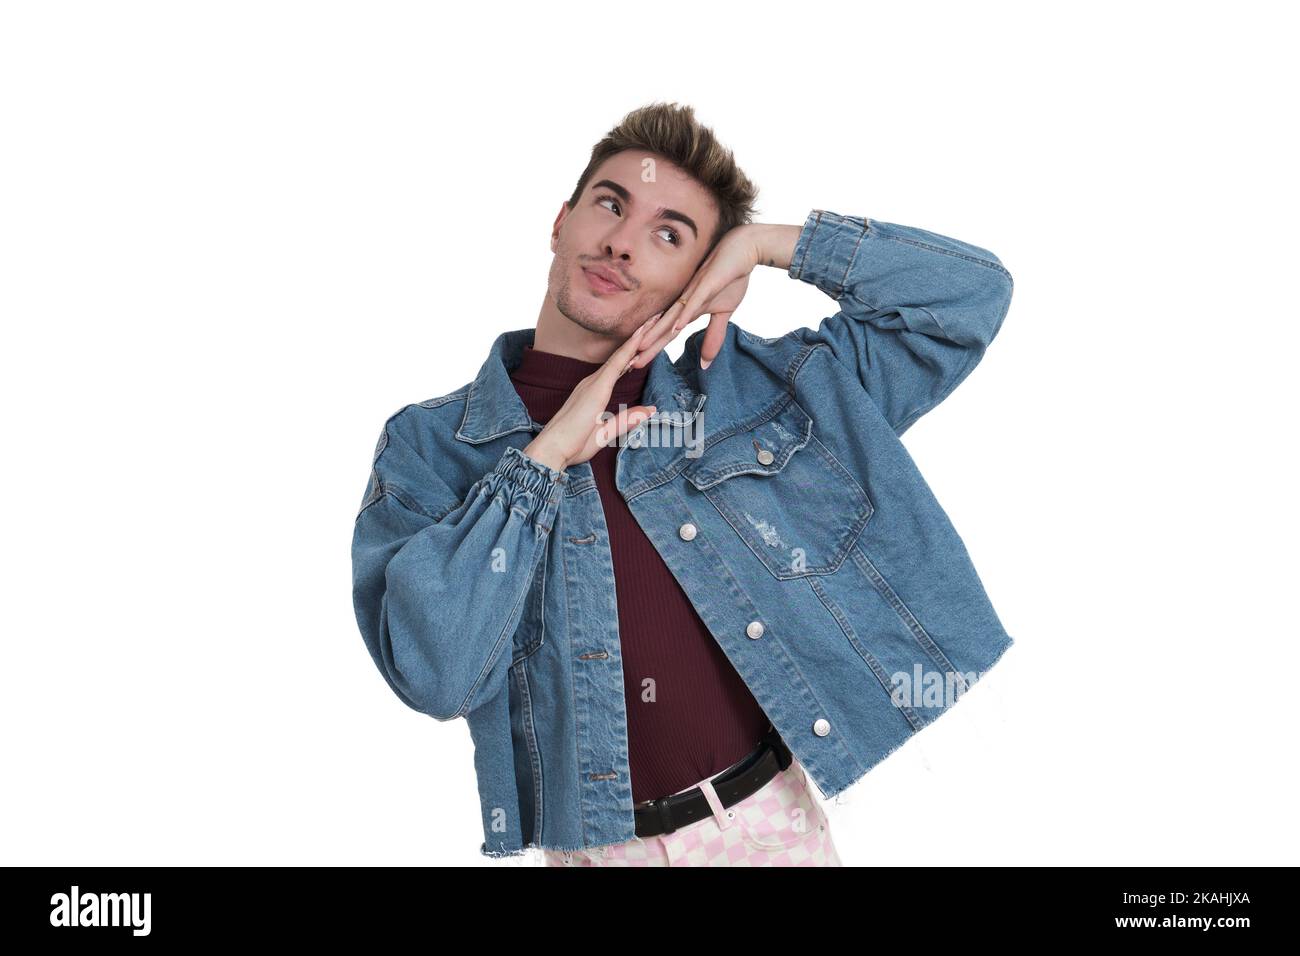 Young caucasian man smiling with his hands on his face, isolated. Stock Photo